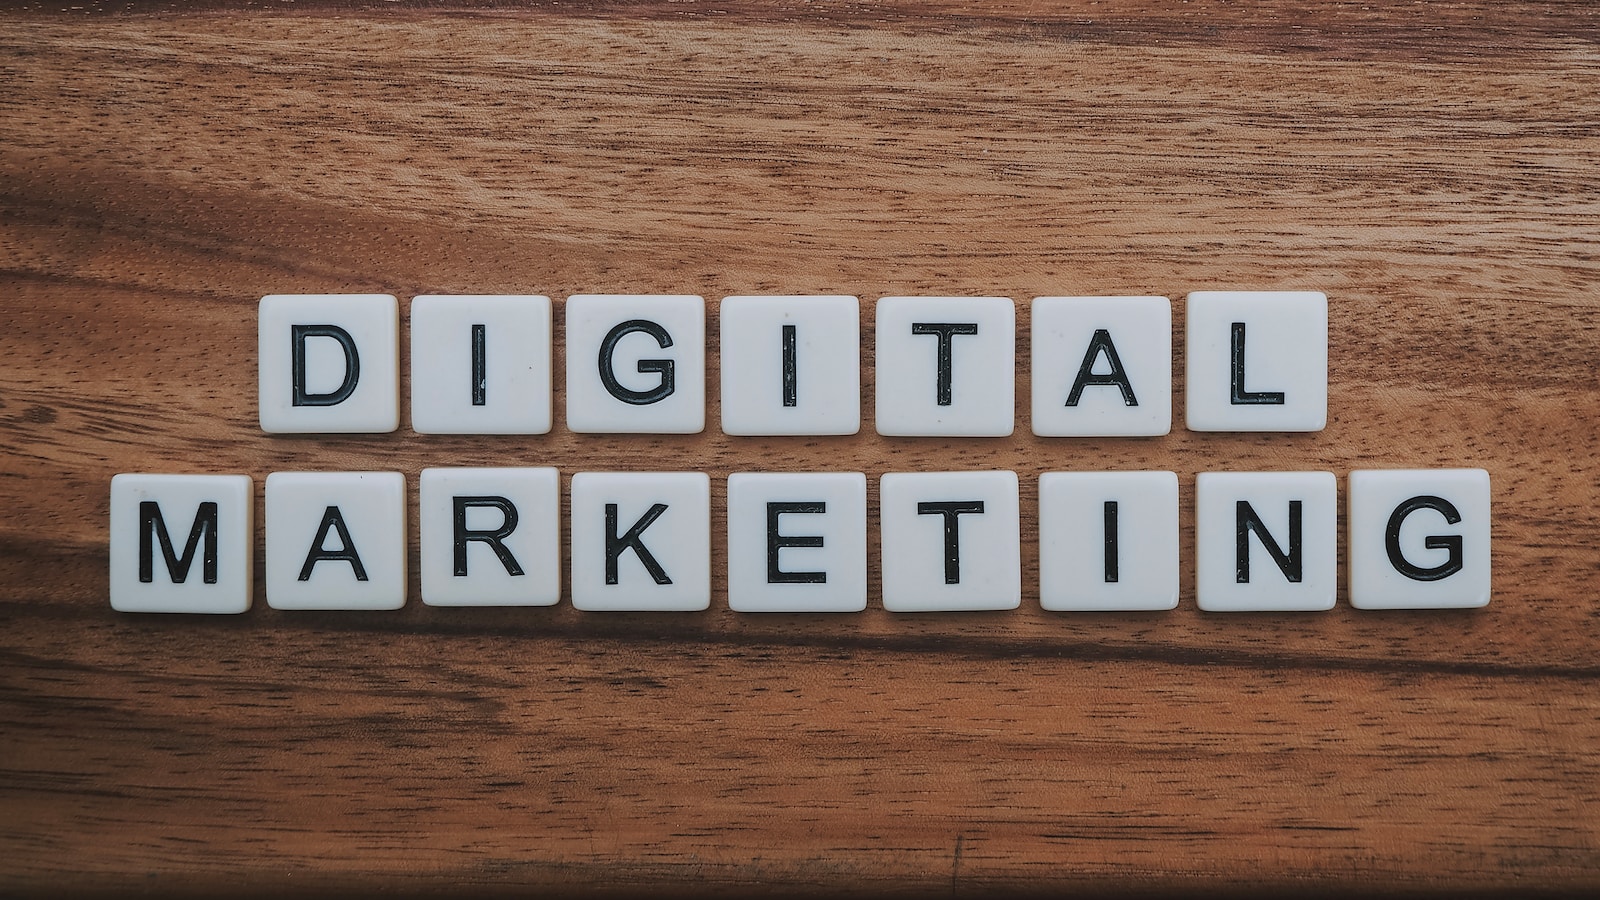 Try something new with digital marketing